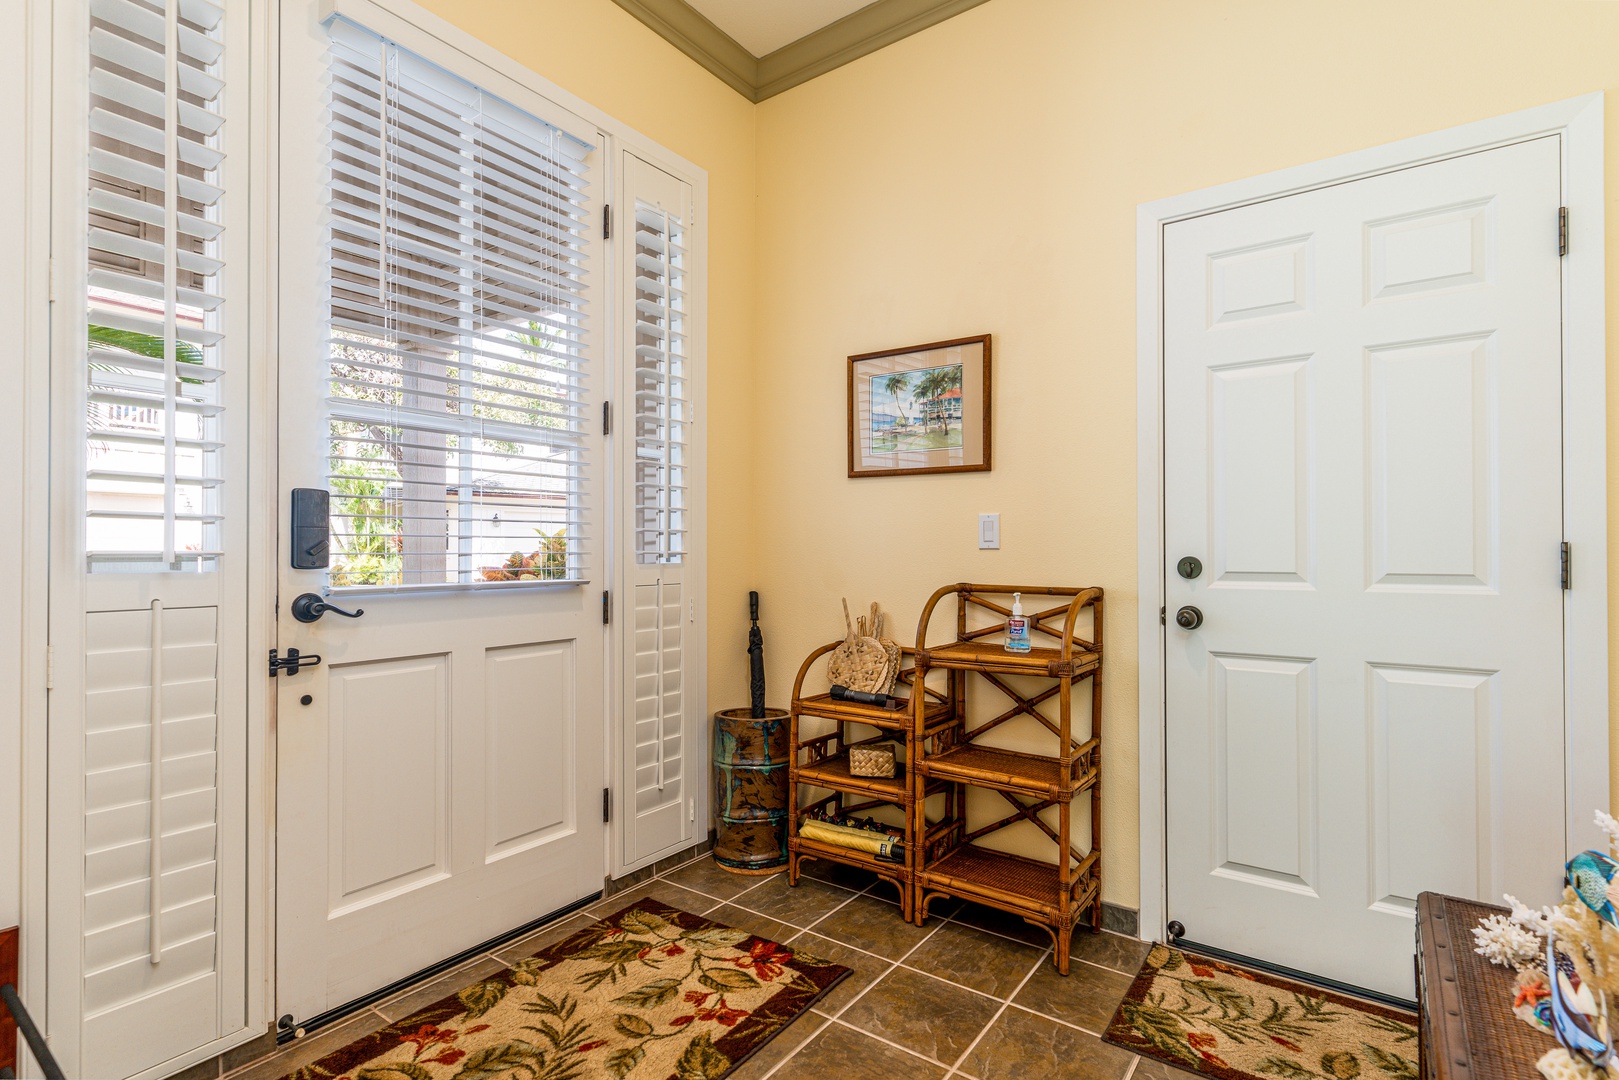 Kapolei Vacation Rentals, Coconut Plantation 1100-2 - The entrance with storage for your belongings.